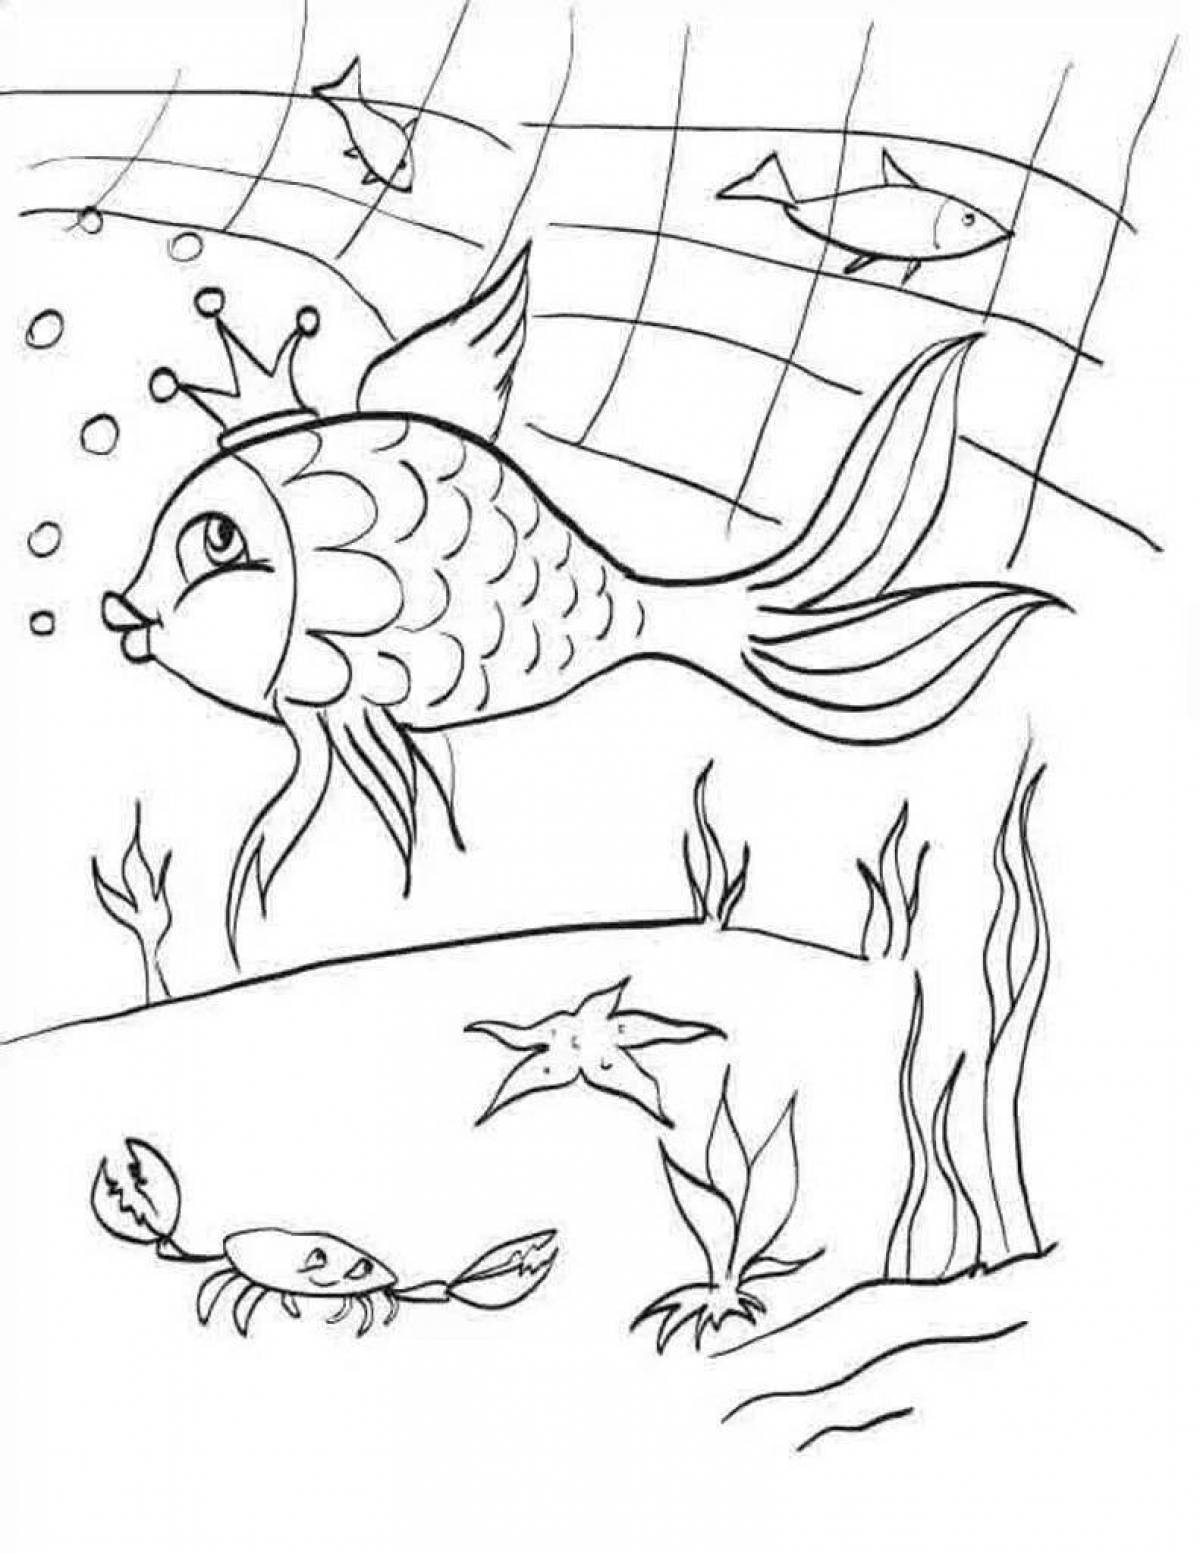 Adorable Goldfish Story Coloring Page